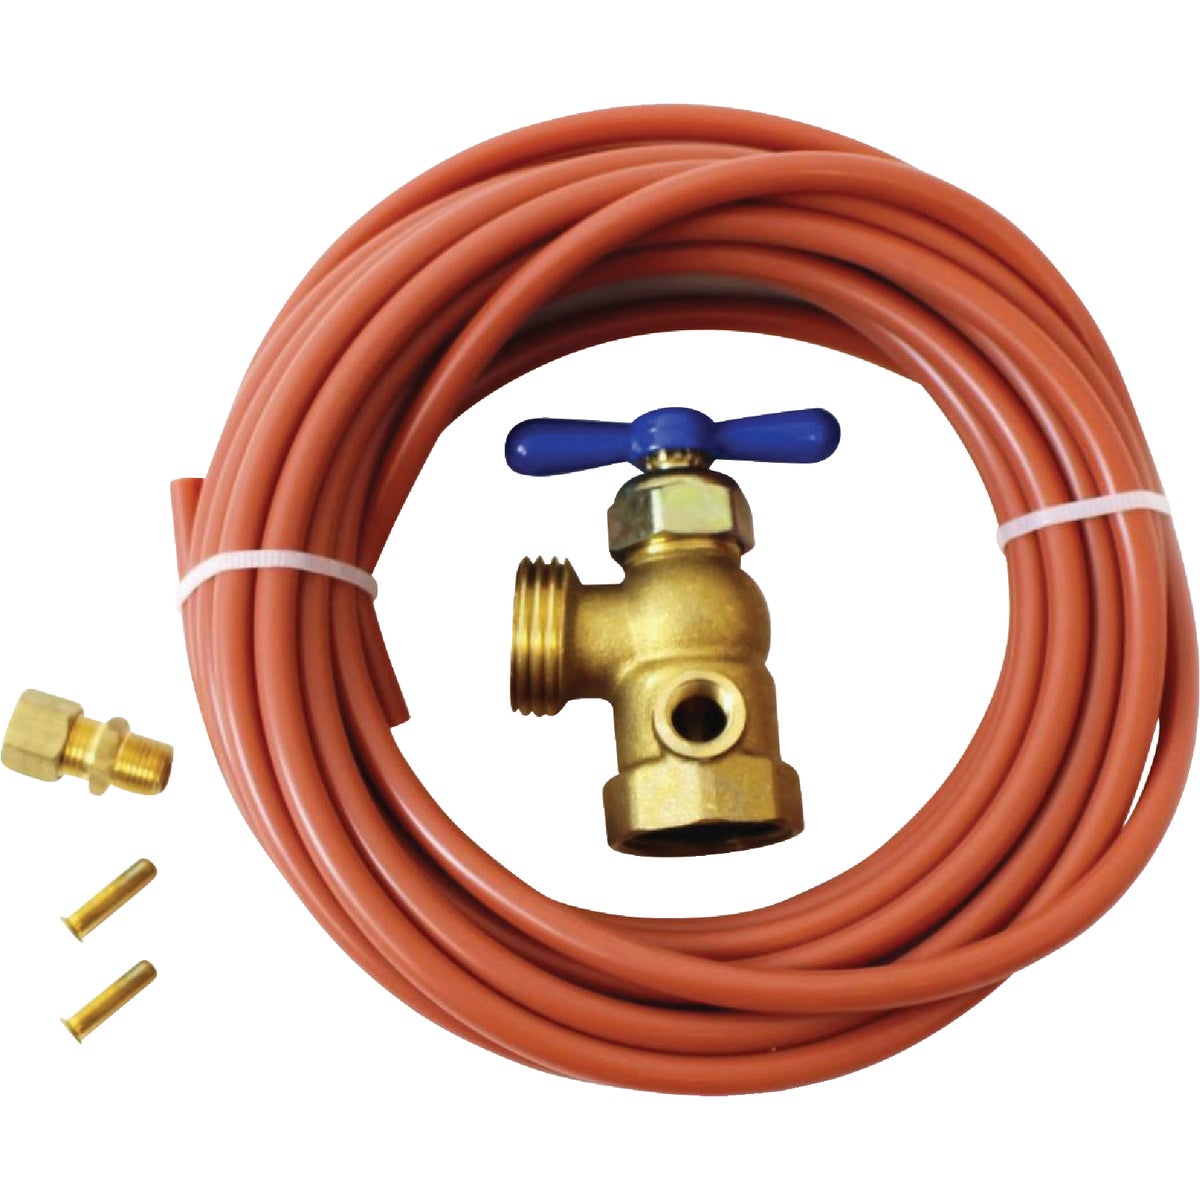 Item 462074, This kit contains everything needed need to run a water line to an 